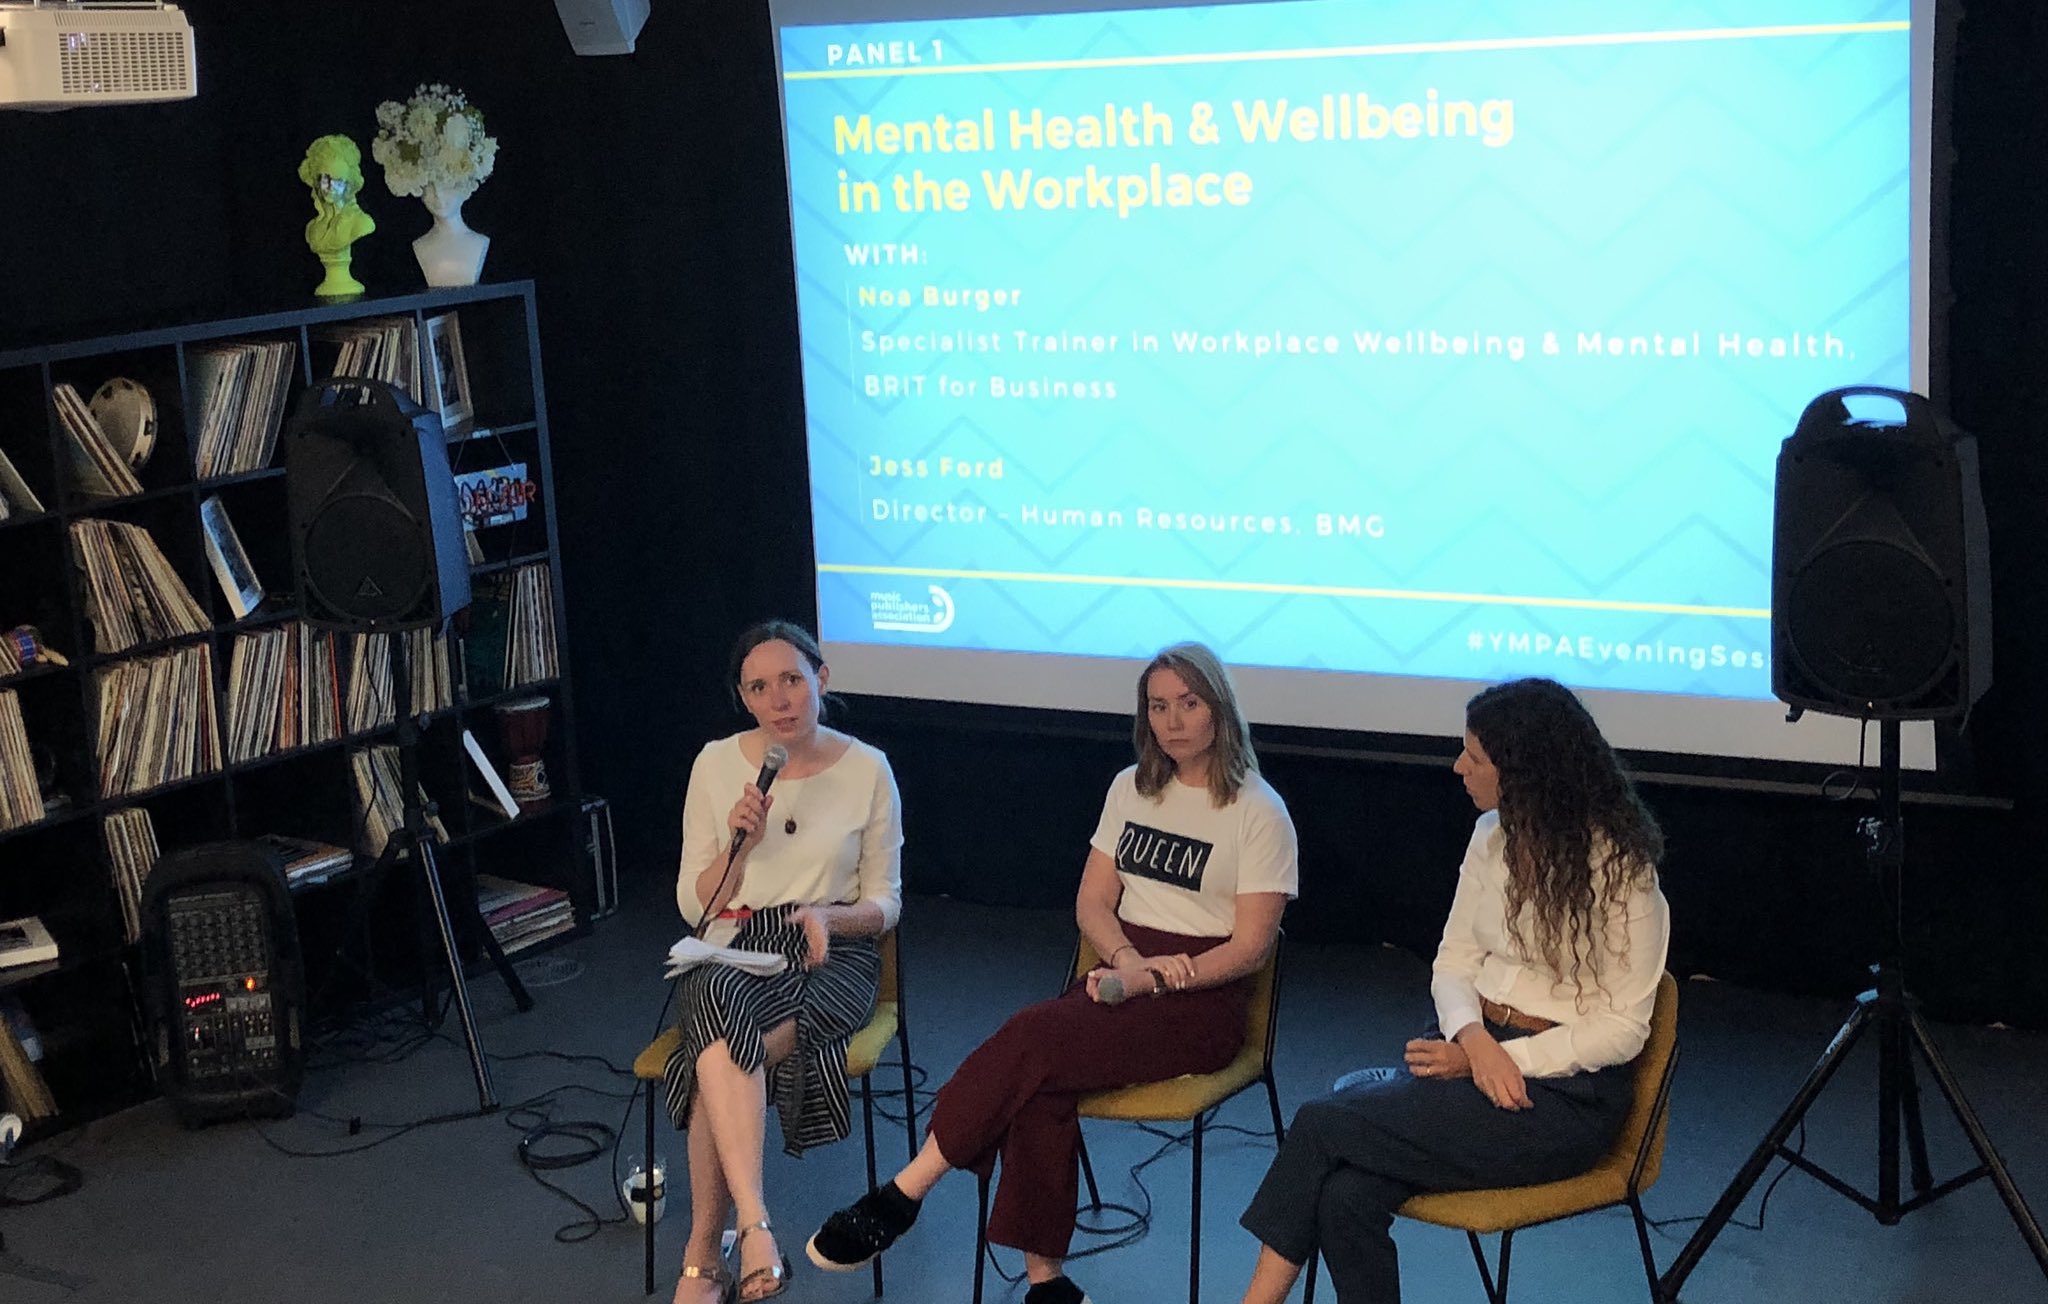 Mental Health & Wellbeing in the Workplace event